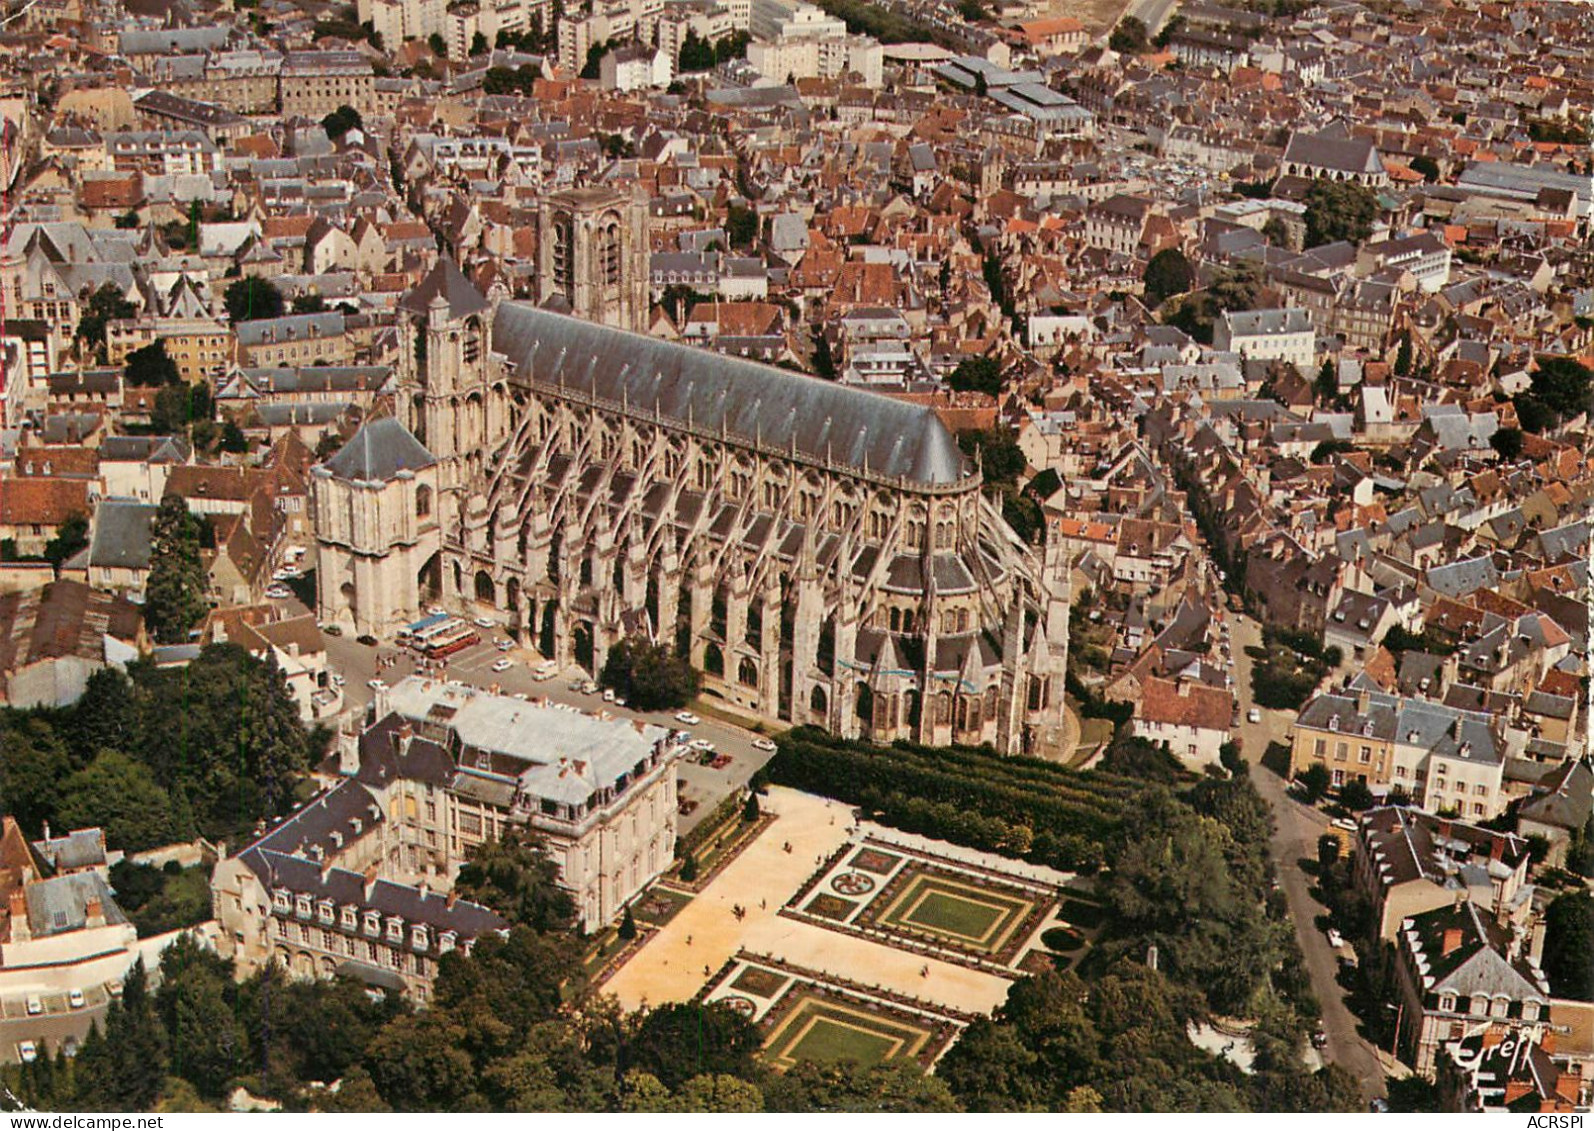  BOURGES  Vue Aerienne  46 (scan Recto-verso)MA2284Bis - Bourges